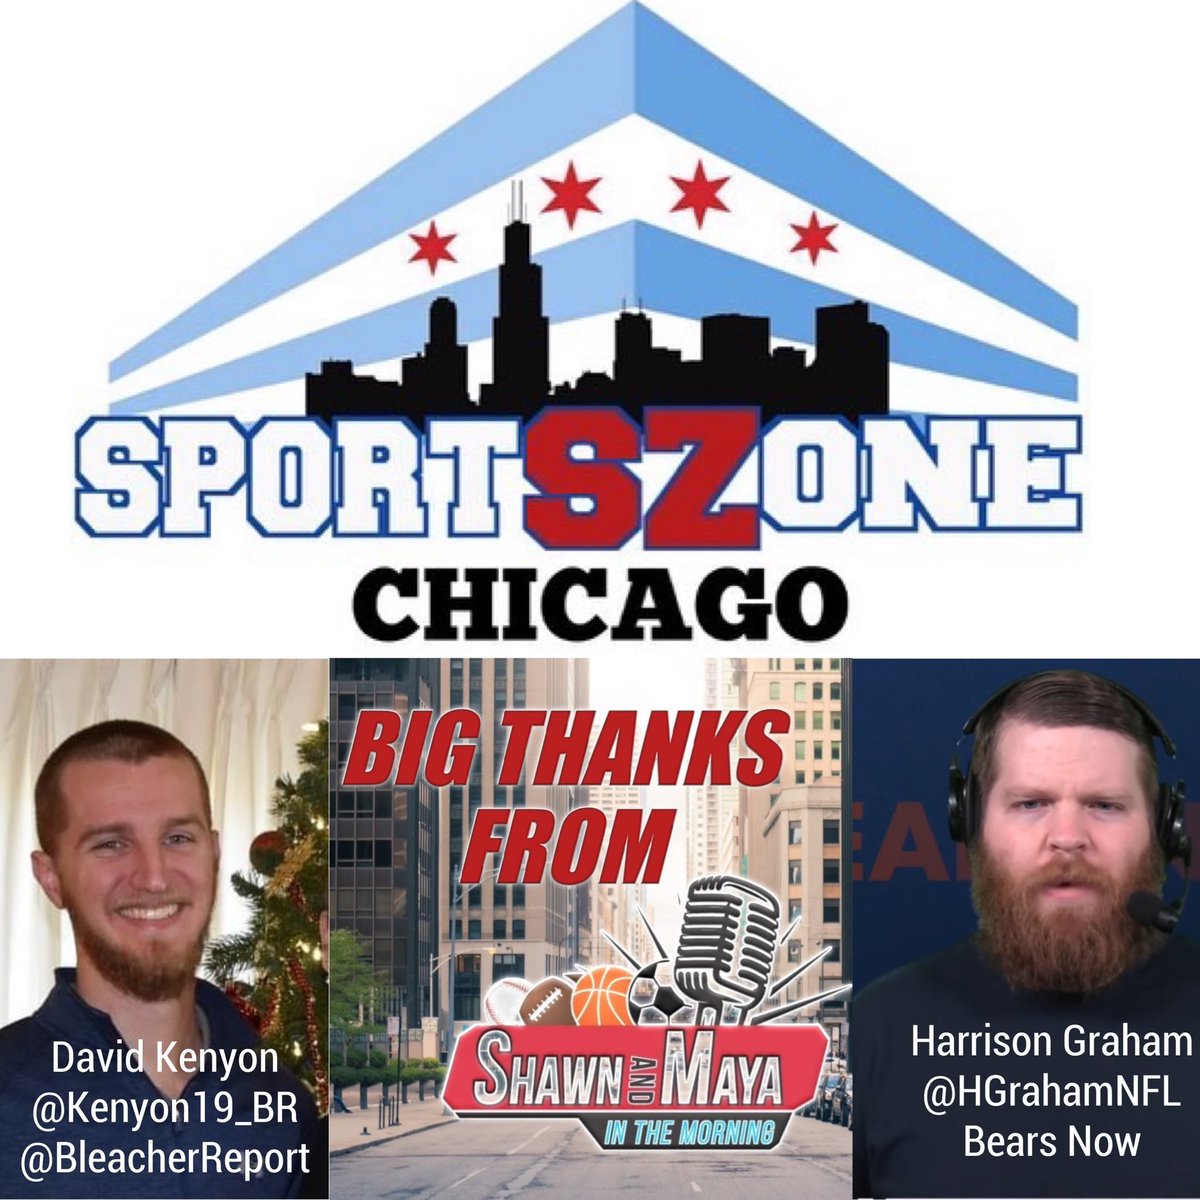 Shout Out to @Kenyon19_BR from @bleacherreport & @HGrahamNFL from @chatsports for coming on @SM_Mornings on @sportszonechicago. You made it a great show! #ShawnAndMaya #ChicagoSports
#TheSuperBack #TheSportsChica #SportsZoneChicago
#LoveWhatYouDo #BleacherReport #ChatSports